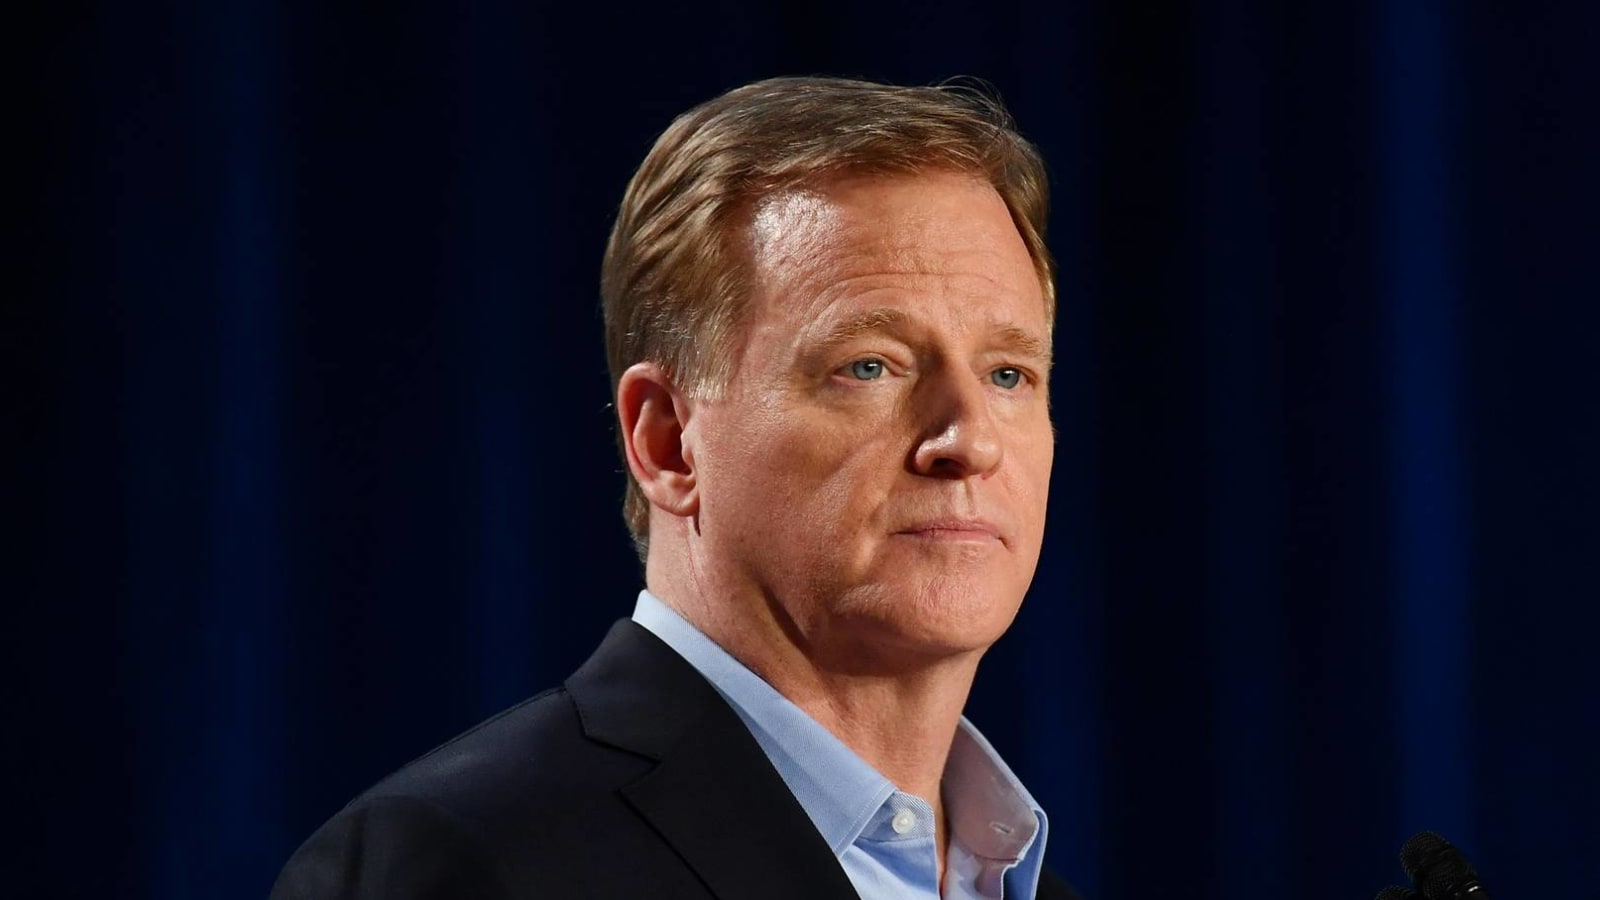 Goodell: NFL was 'wrong' for not listening to players about racism 